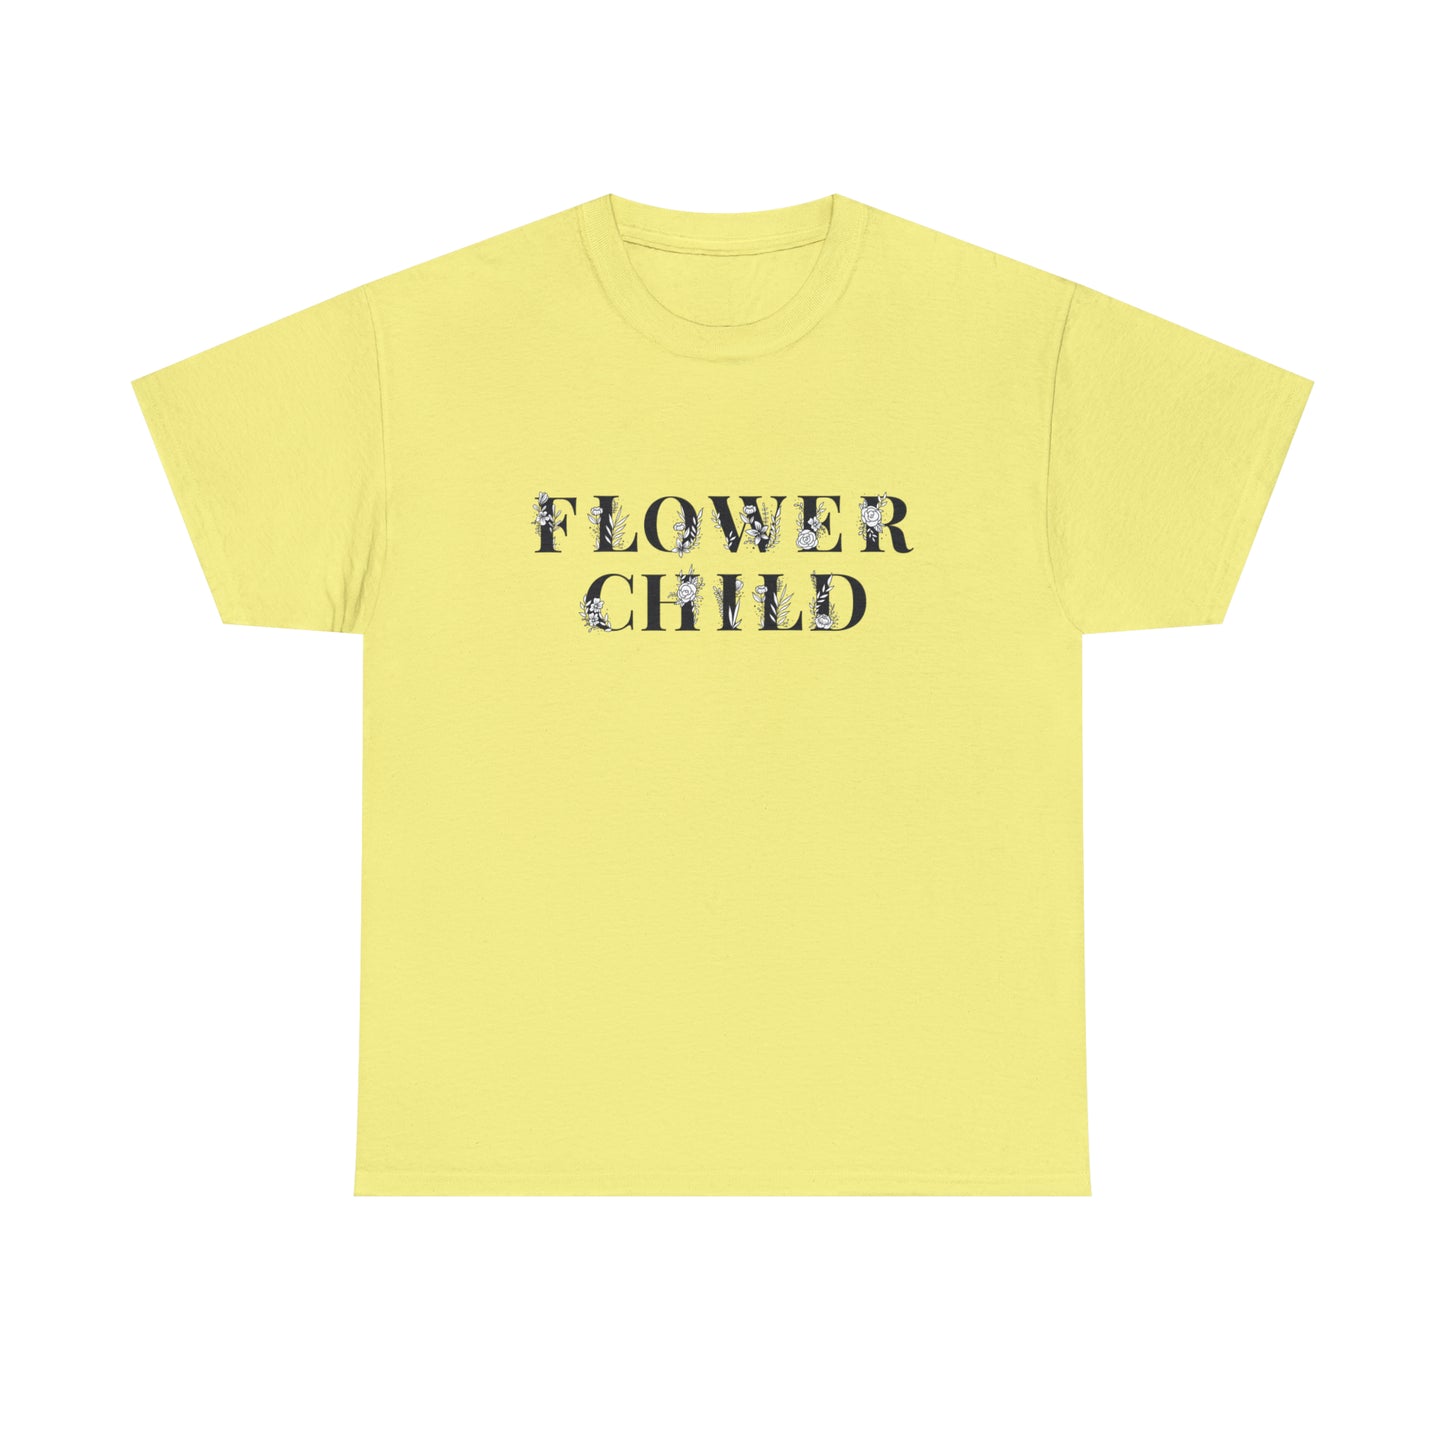 Floral T-Shirt For Flower Child T Shirt For Hippy TShirt Botanical T-Shirt For Woman Floral Lettering Shirt